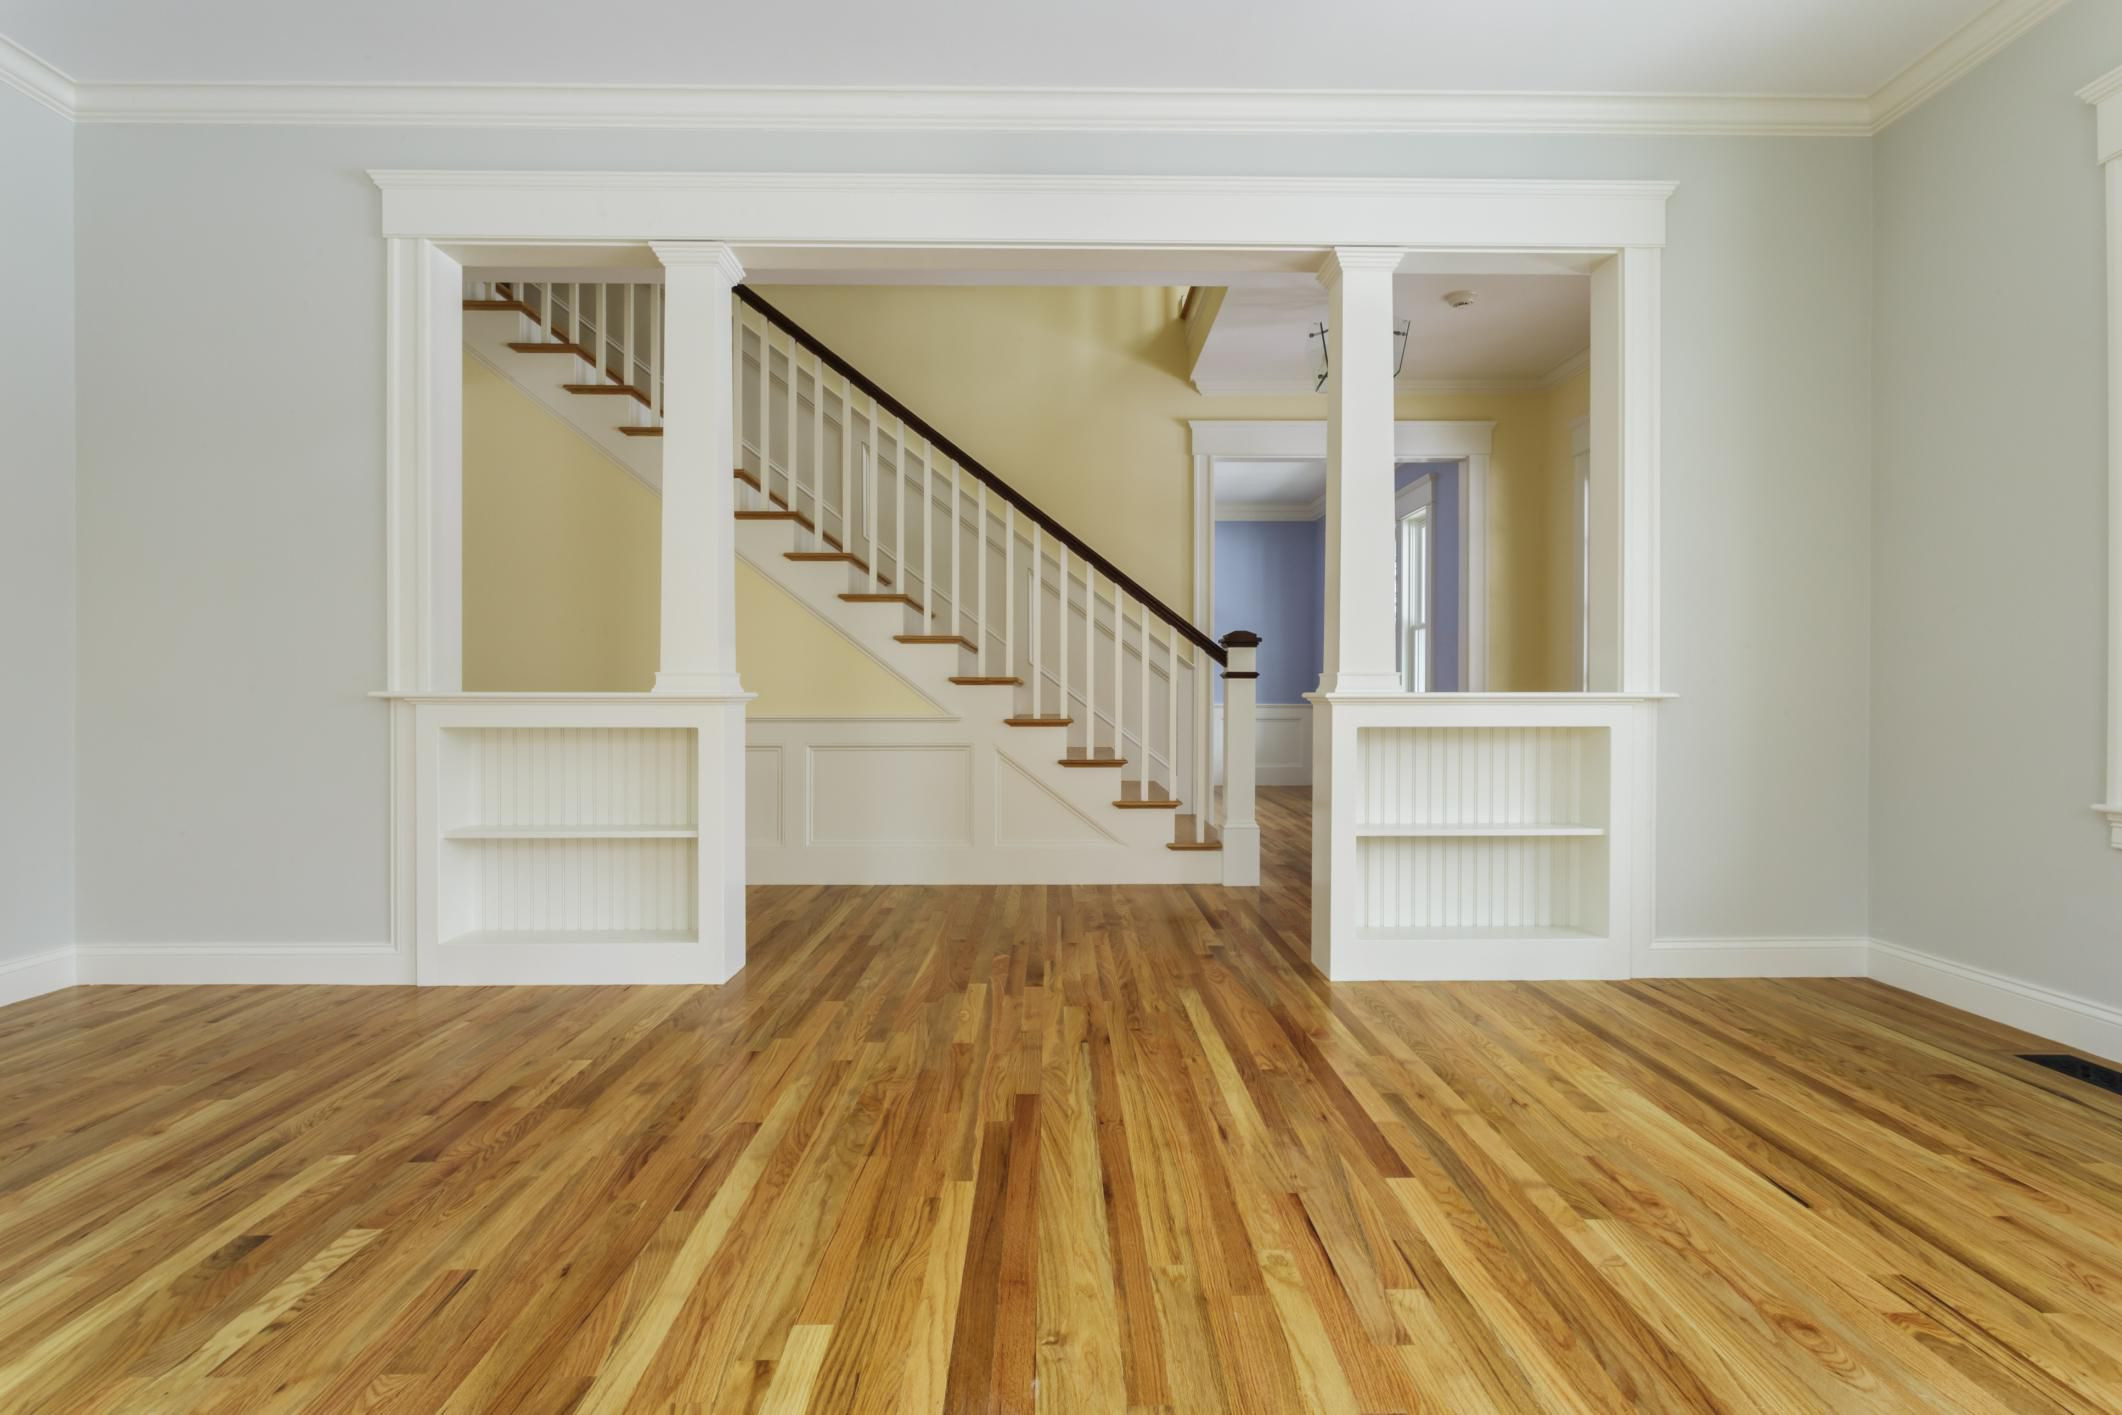 install hardwood floor around stairs of guide to solid hardwood floors regarding 168686571 56a49f213df78cf772834e24